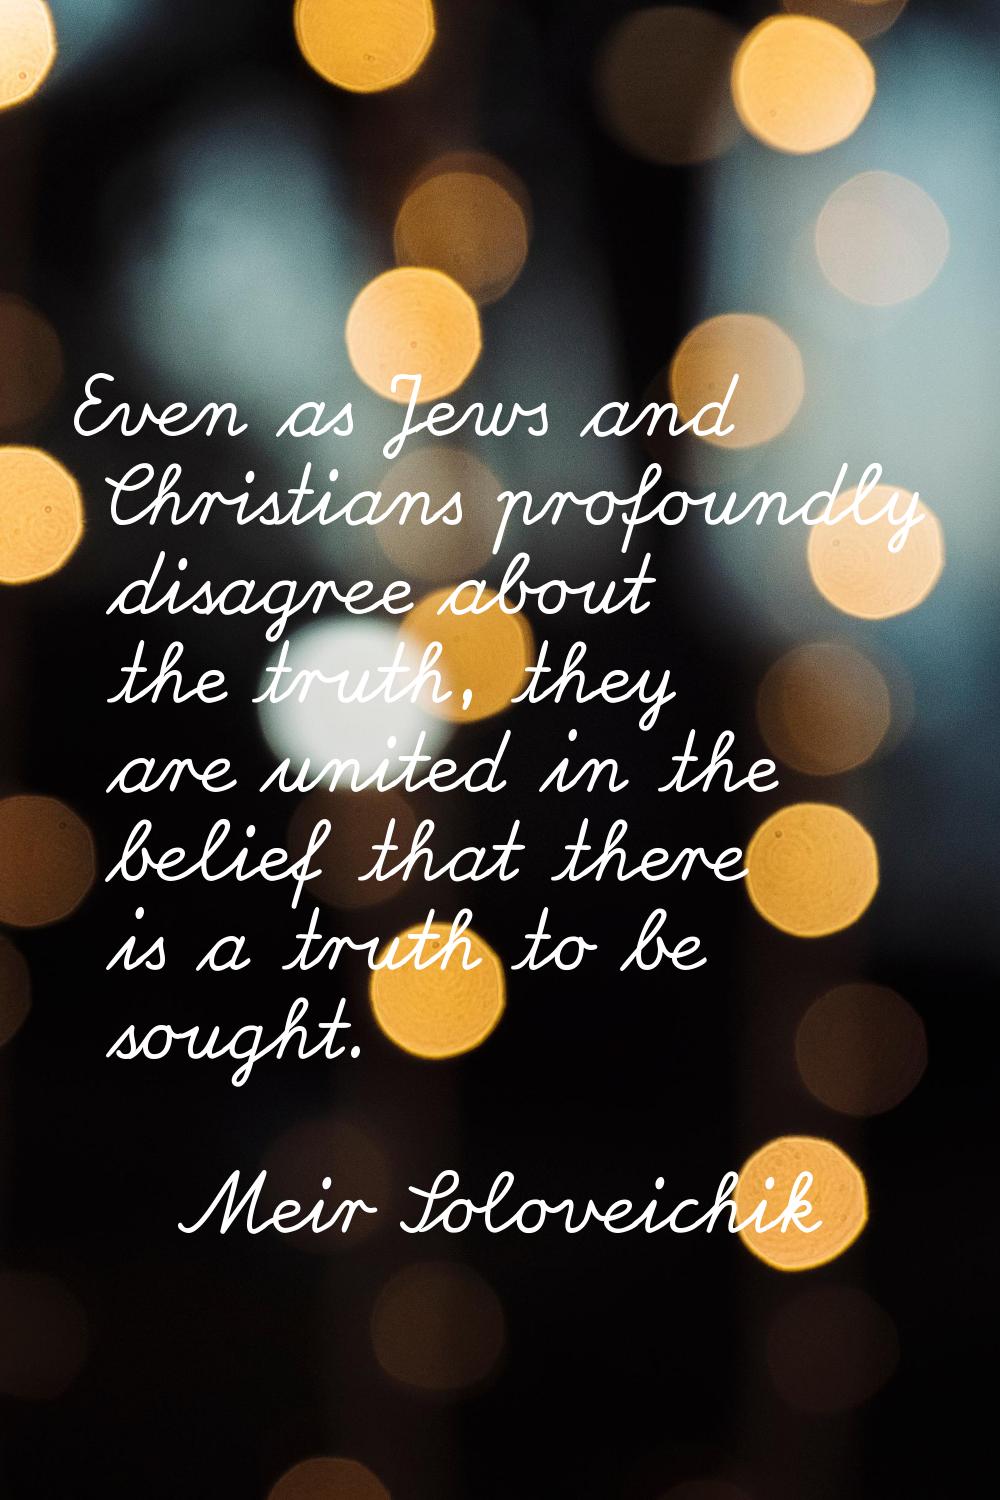 Even as Jews and Christians profoundly disagree about the truth, they are united in the belief that